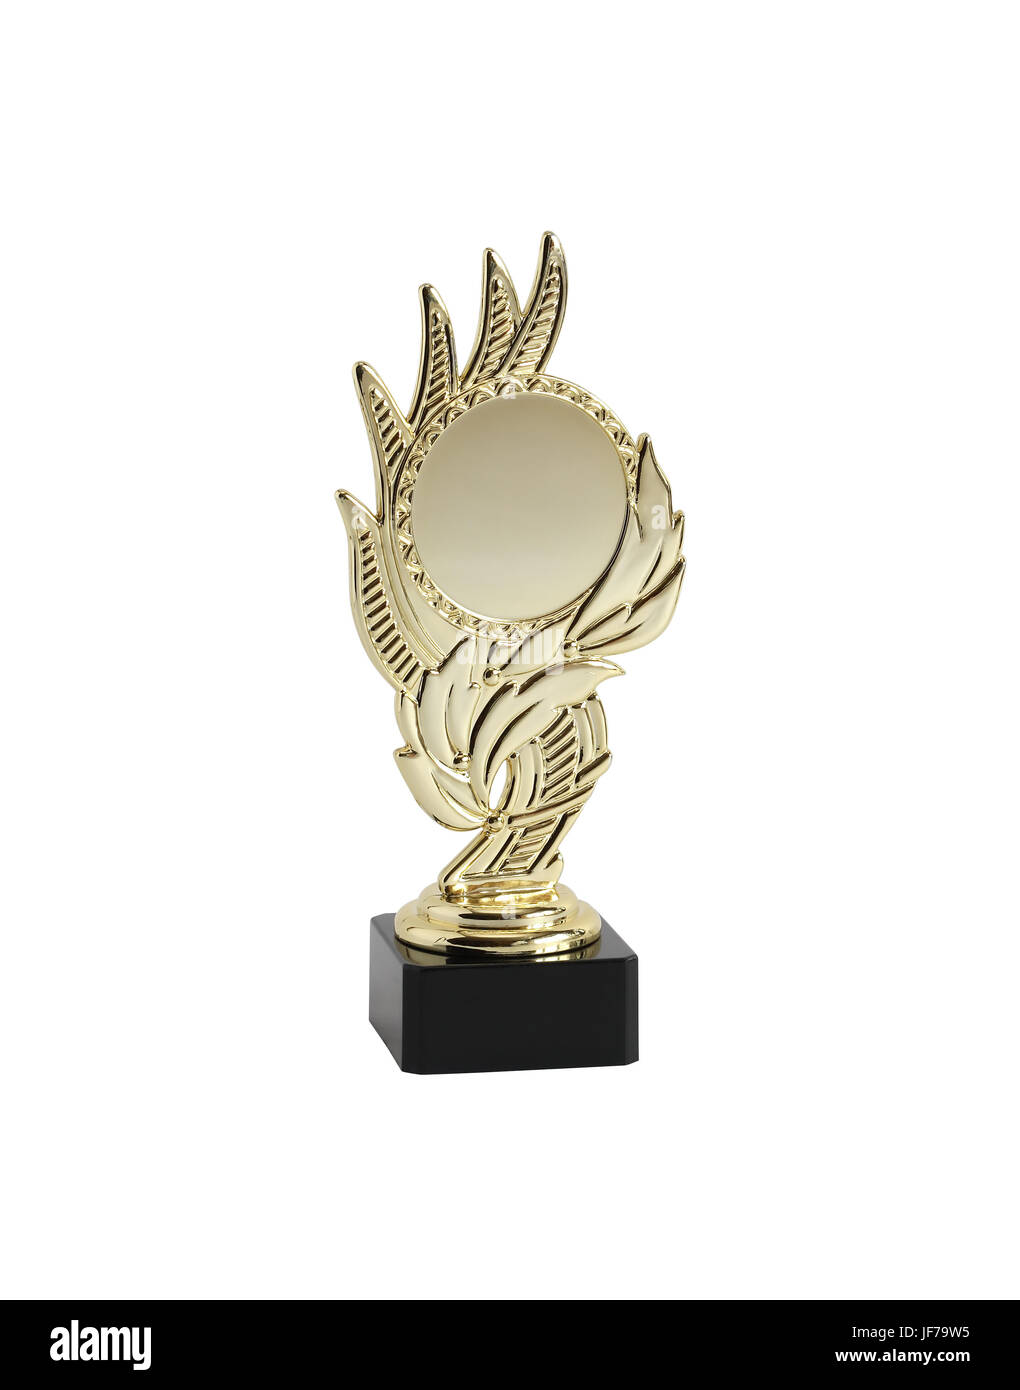 Gold trophy isolated on white background with clipping path Stock Photo